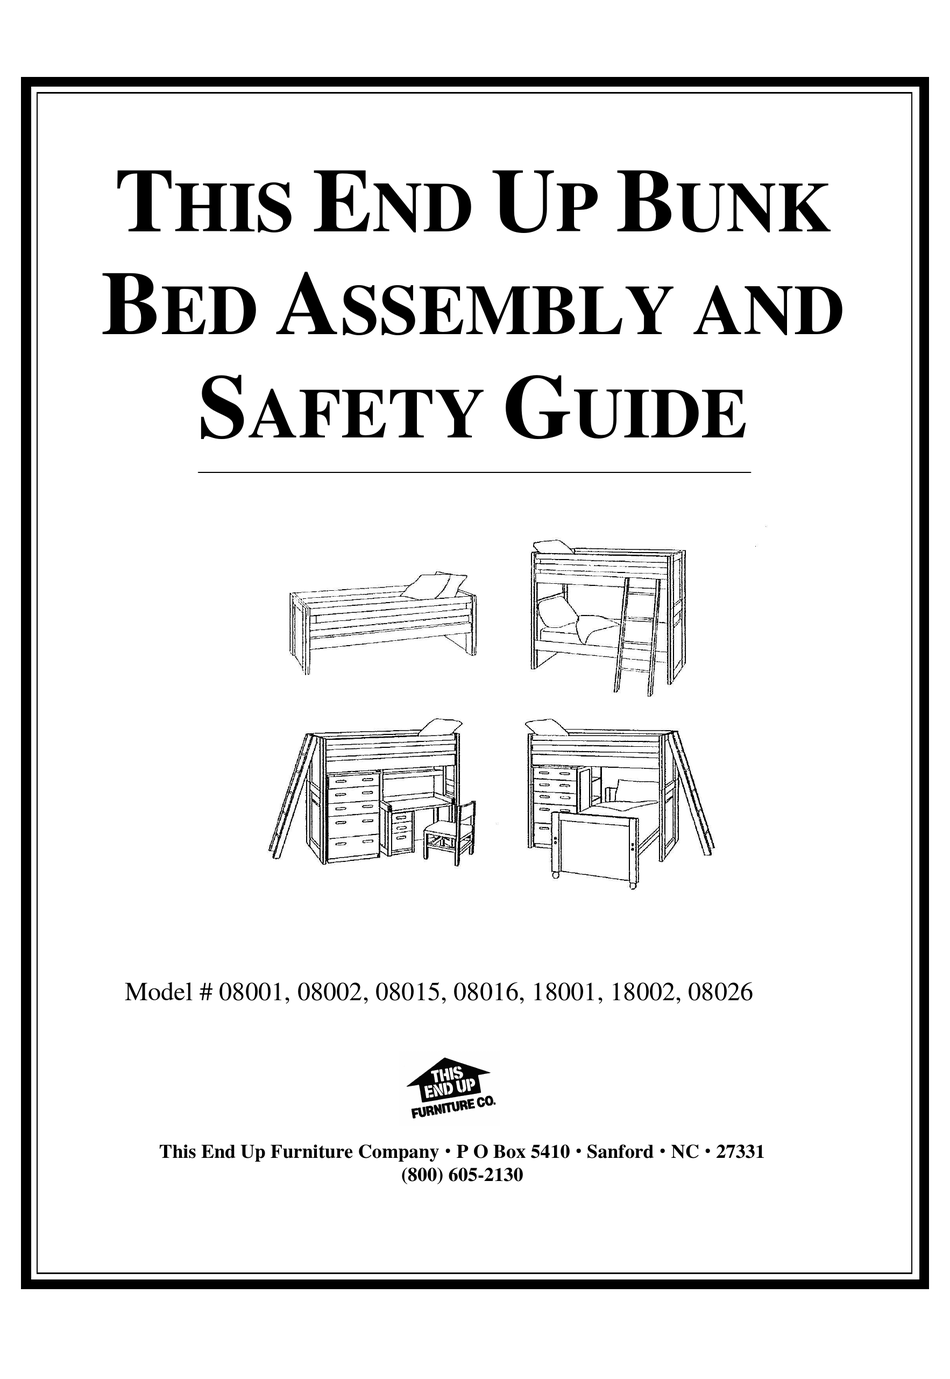 Furniture Bunk Bed 08001 Assembly, This End Up Furniture Bunk Beds